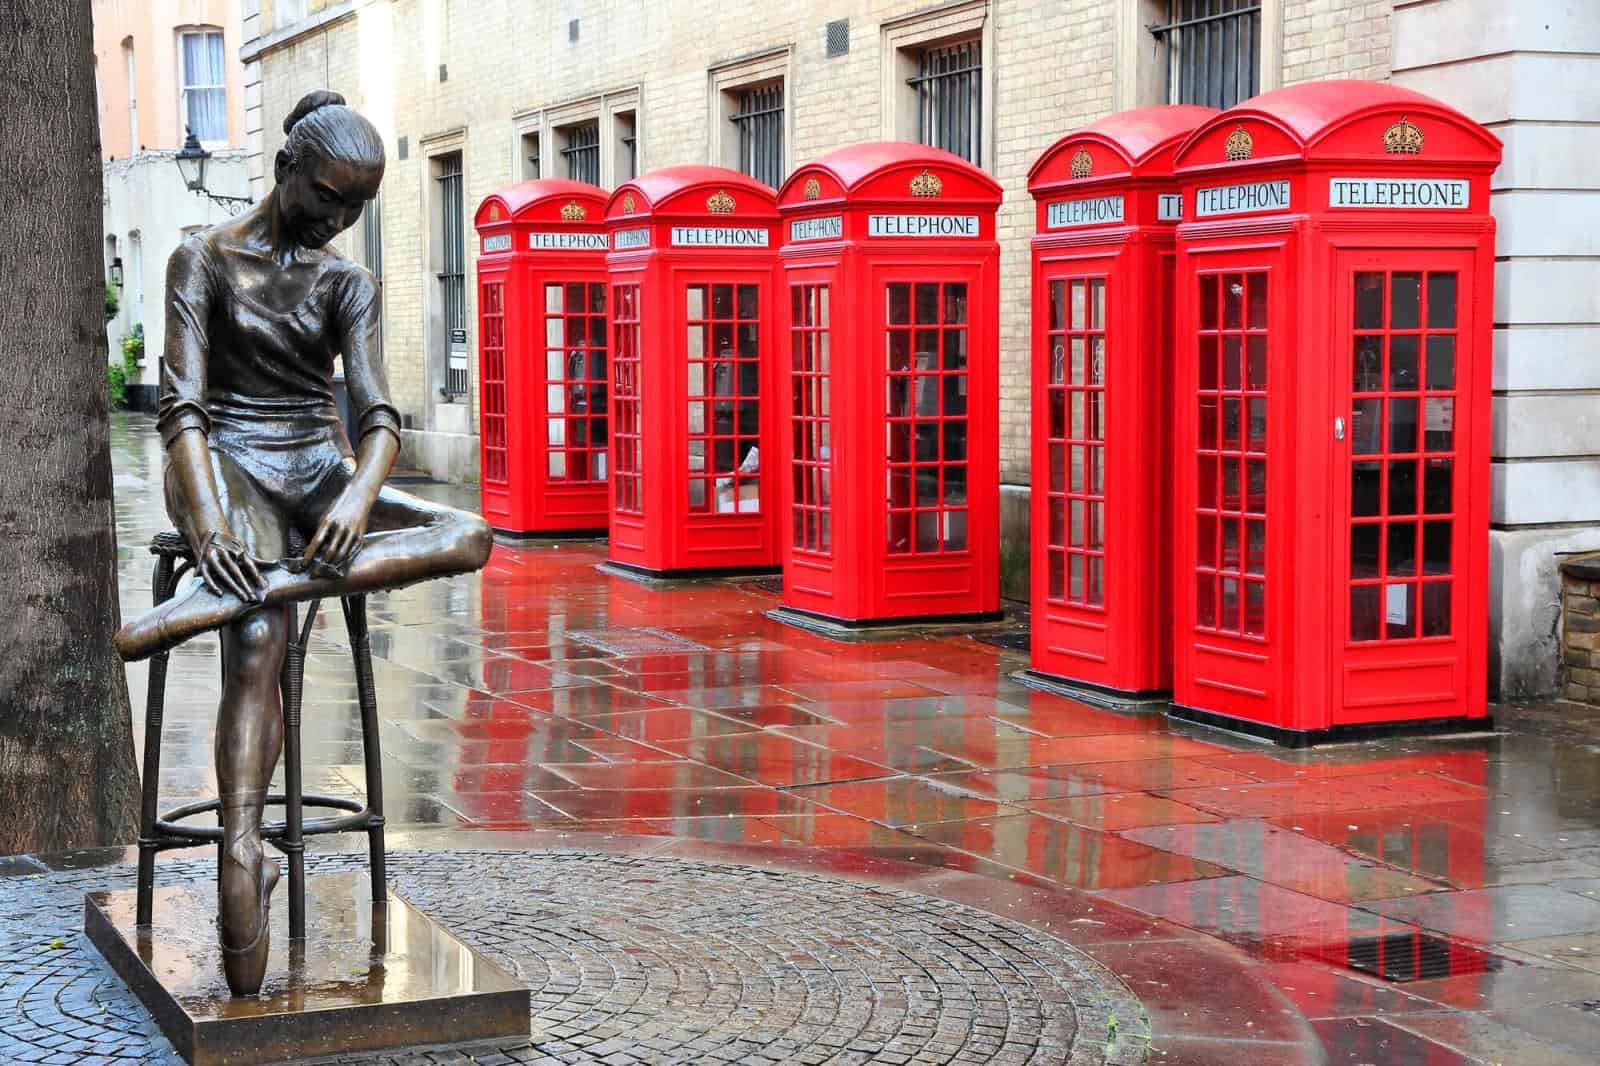 Ballerina Statue and phone boxes in Covent Garden